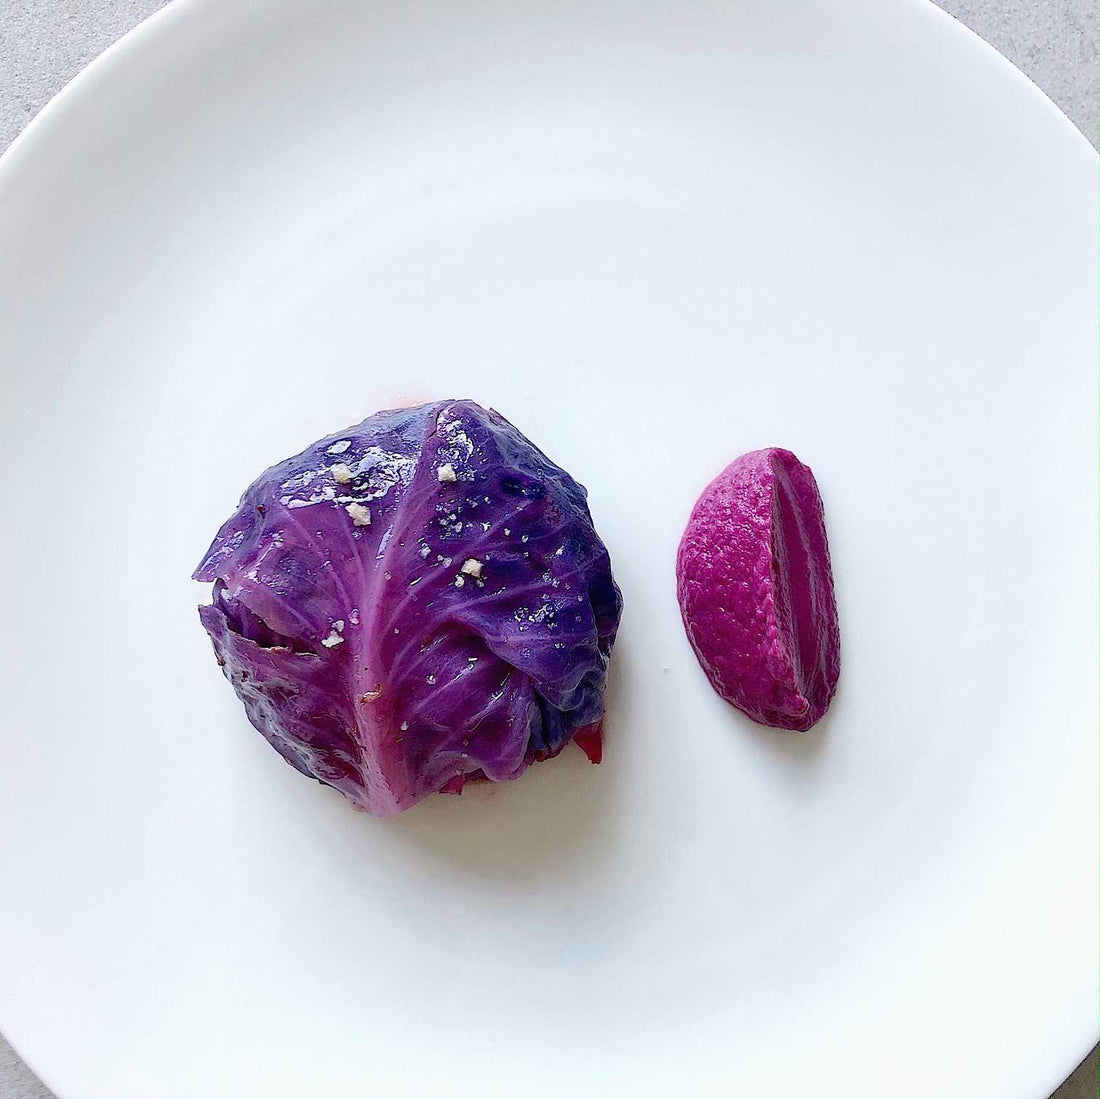 Best Stuffed Red Cabbage recipe with Truffle